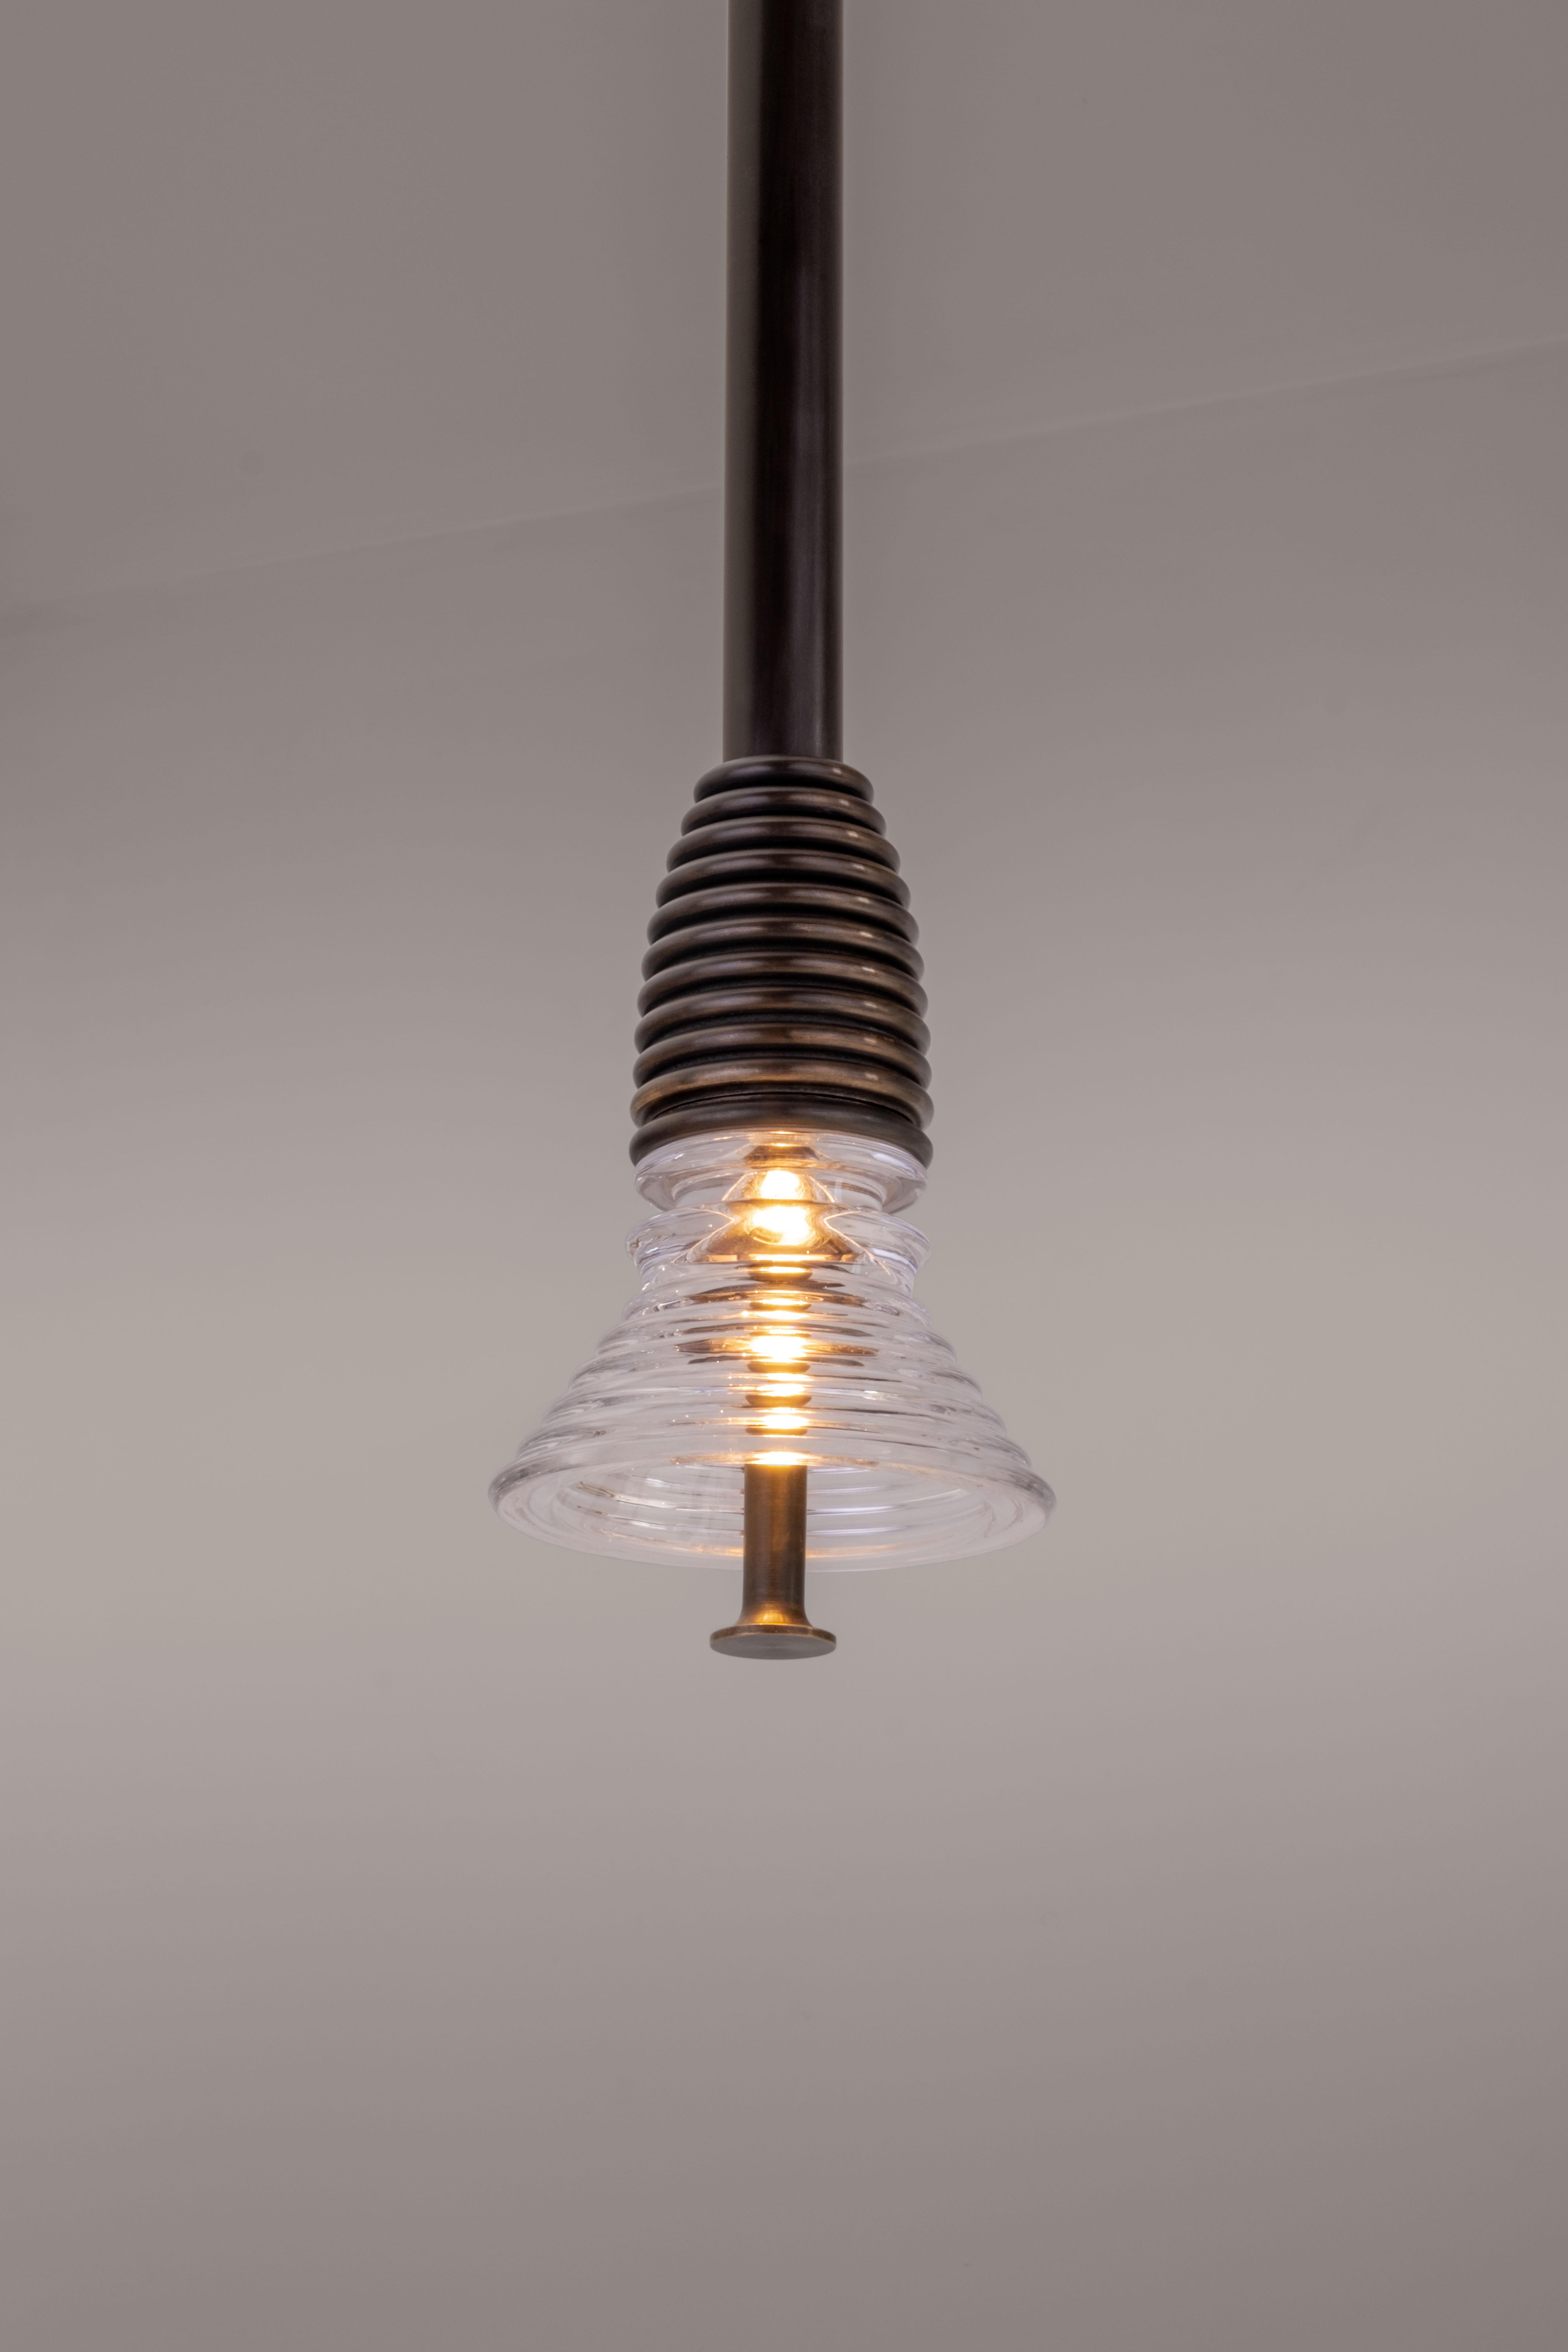 The Insulator 'A' Pendant in polished brass and clear glass by NOVOCASTRIAN deco For Sale 3